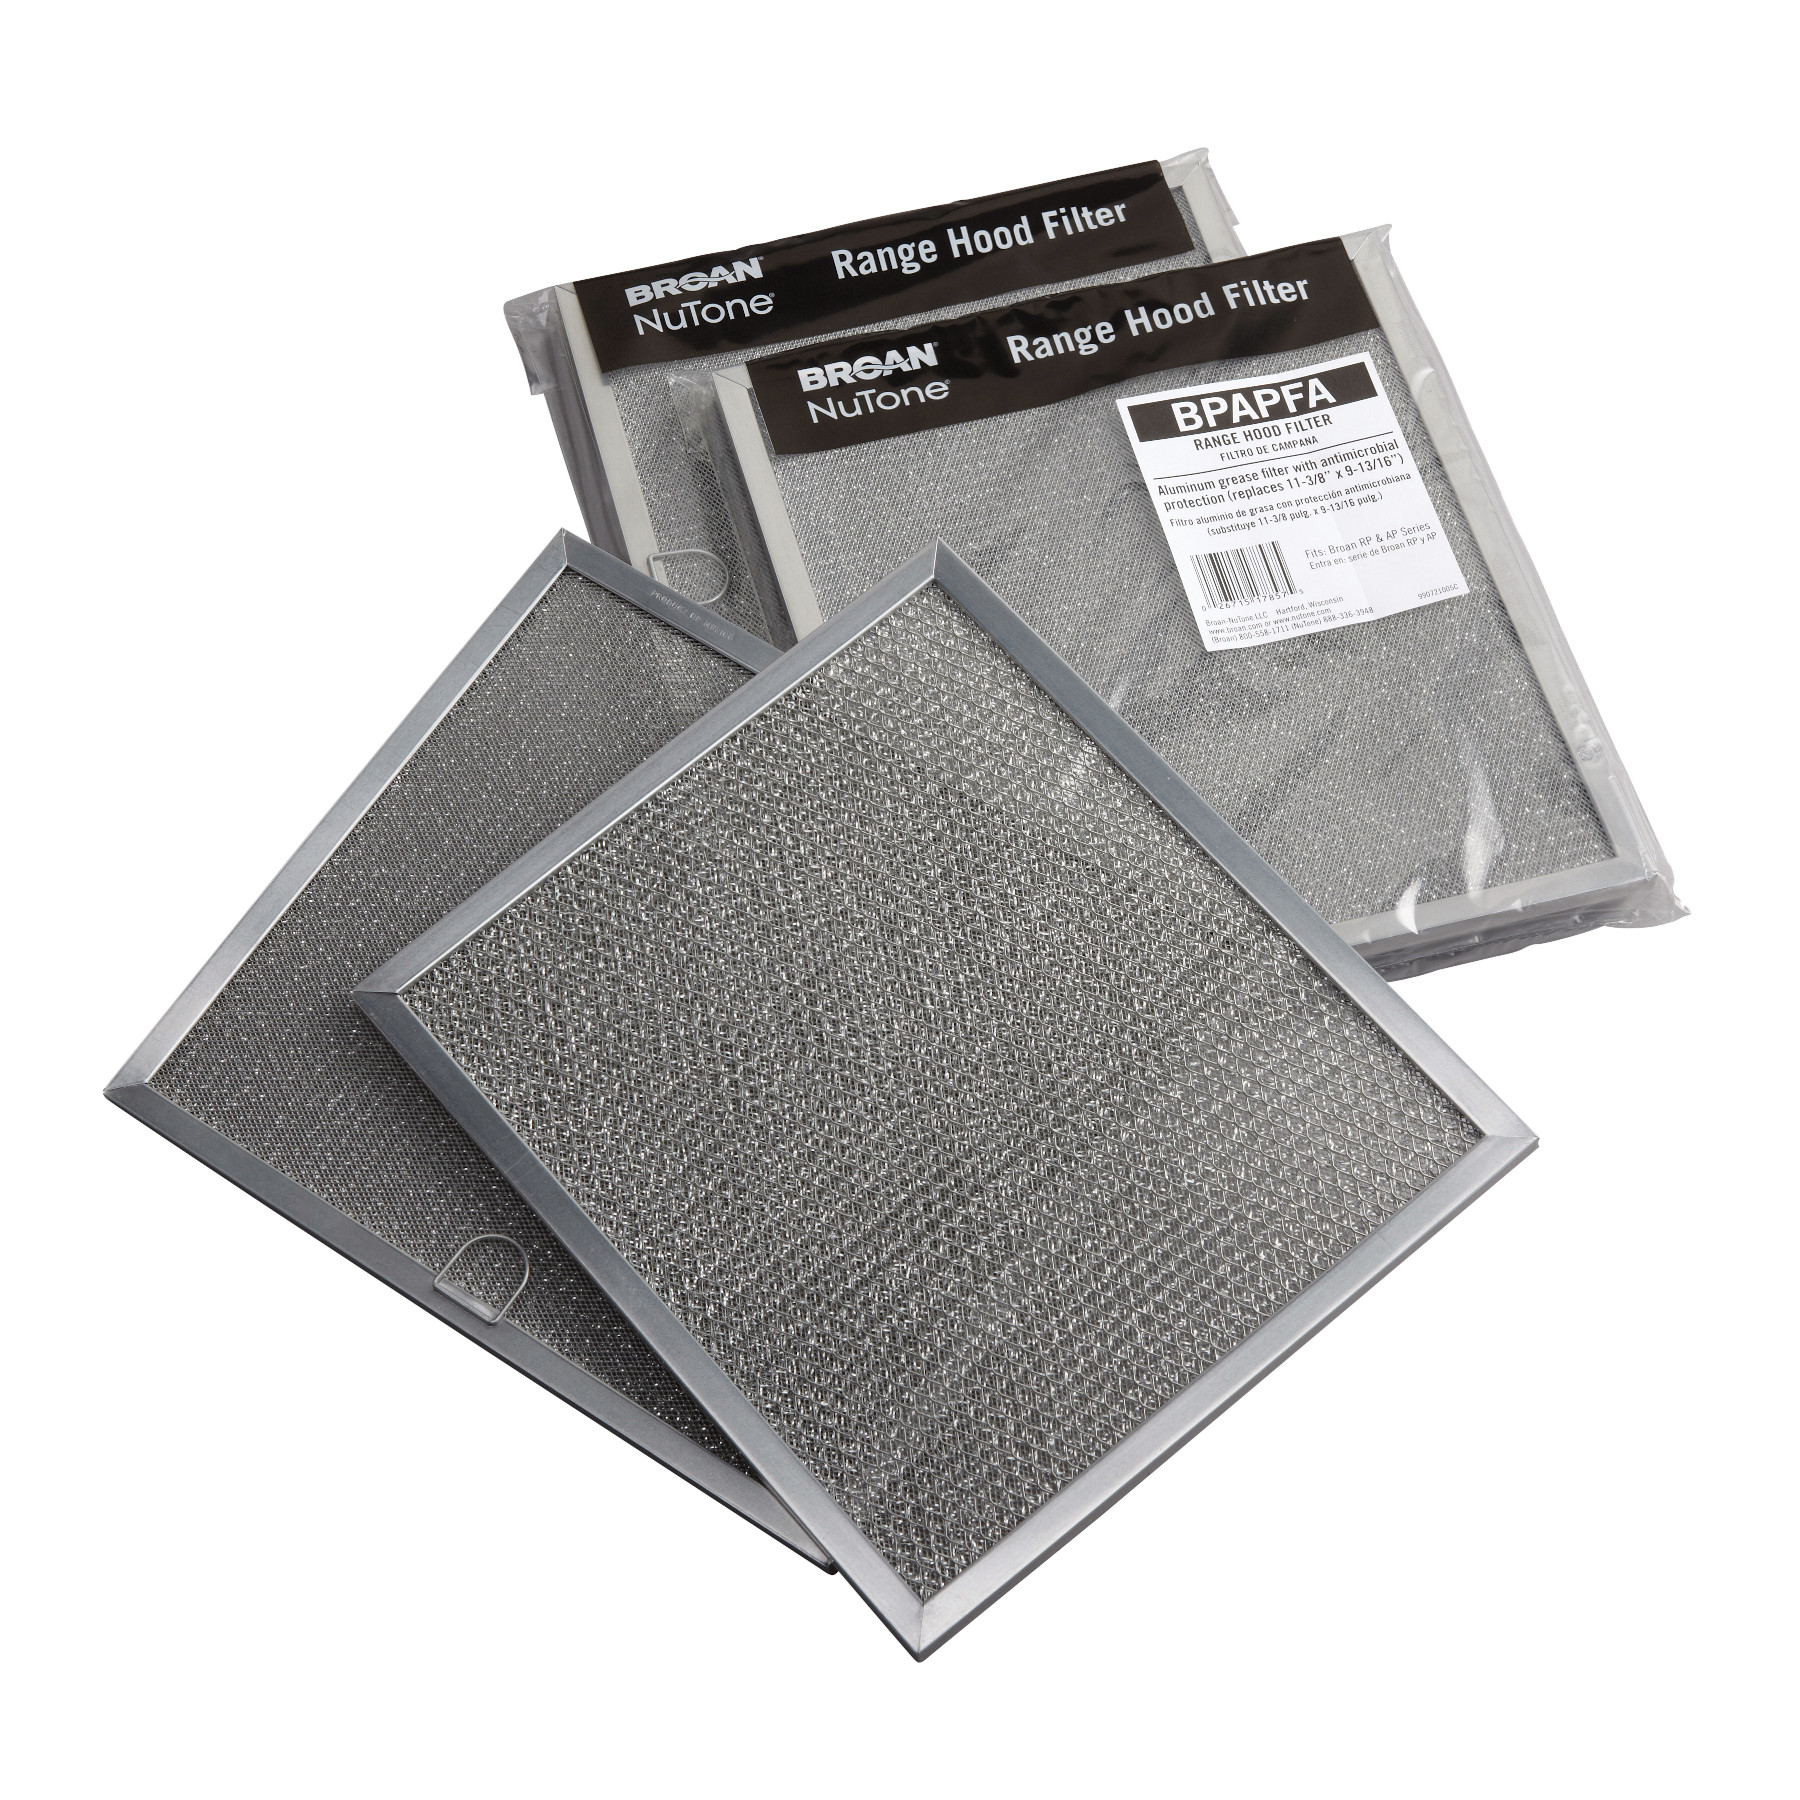 Grease Filter with Antimicrobial Protection for AP1 and RP1 Range Hoods